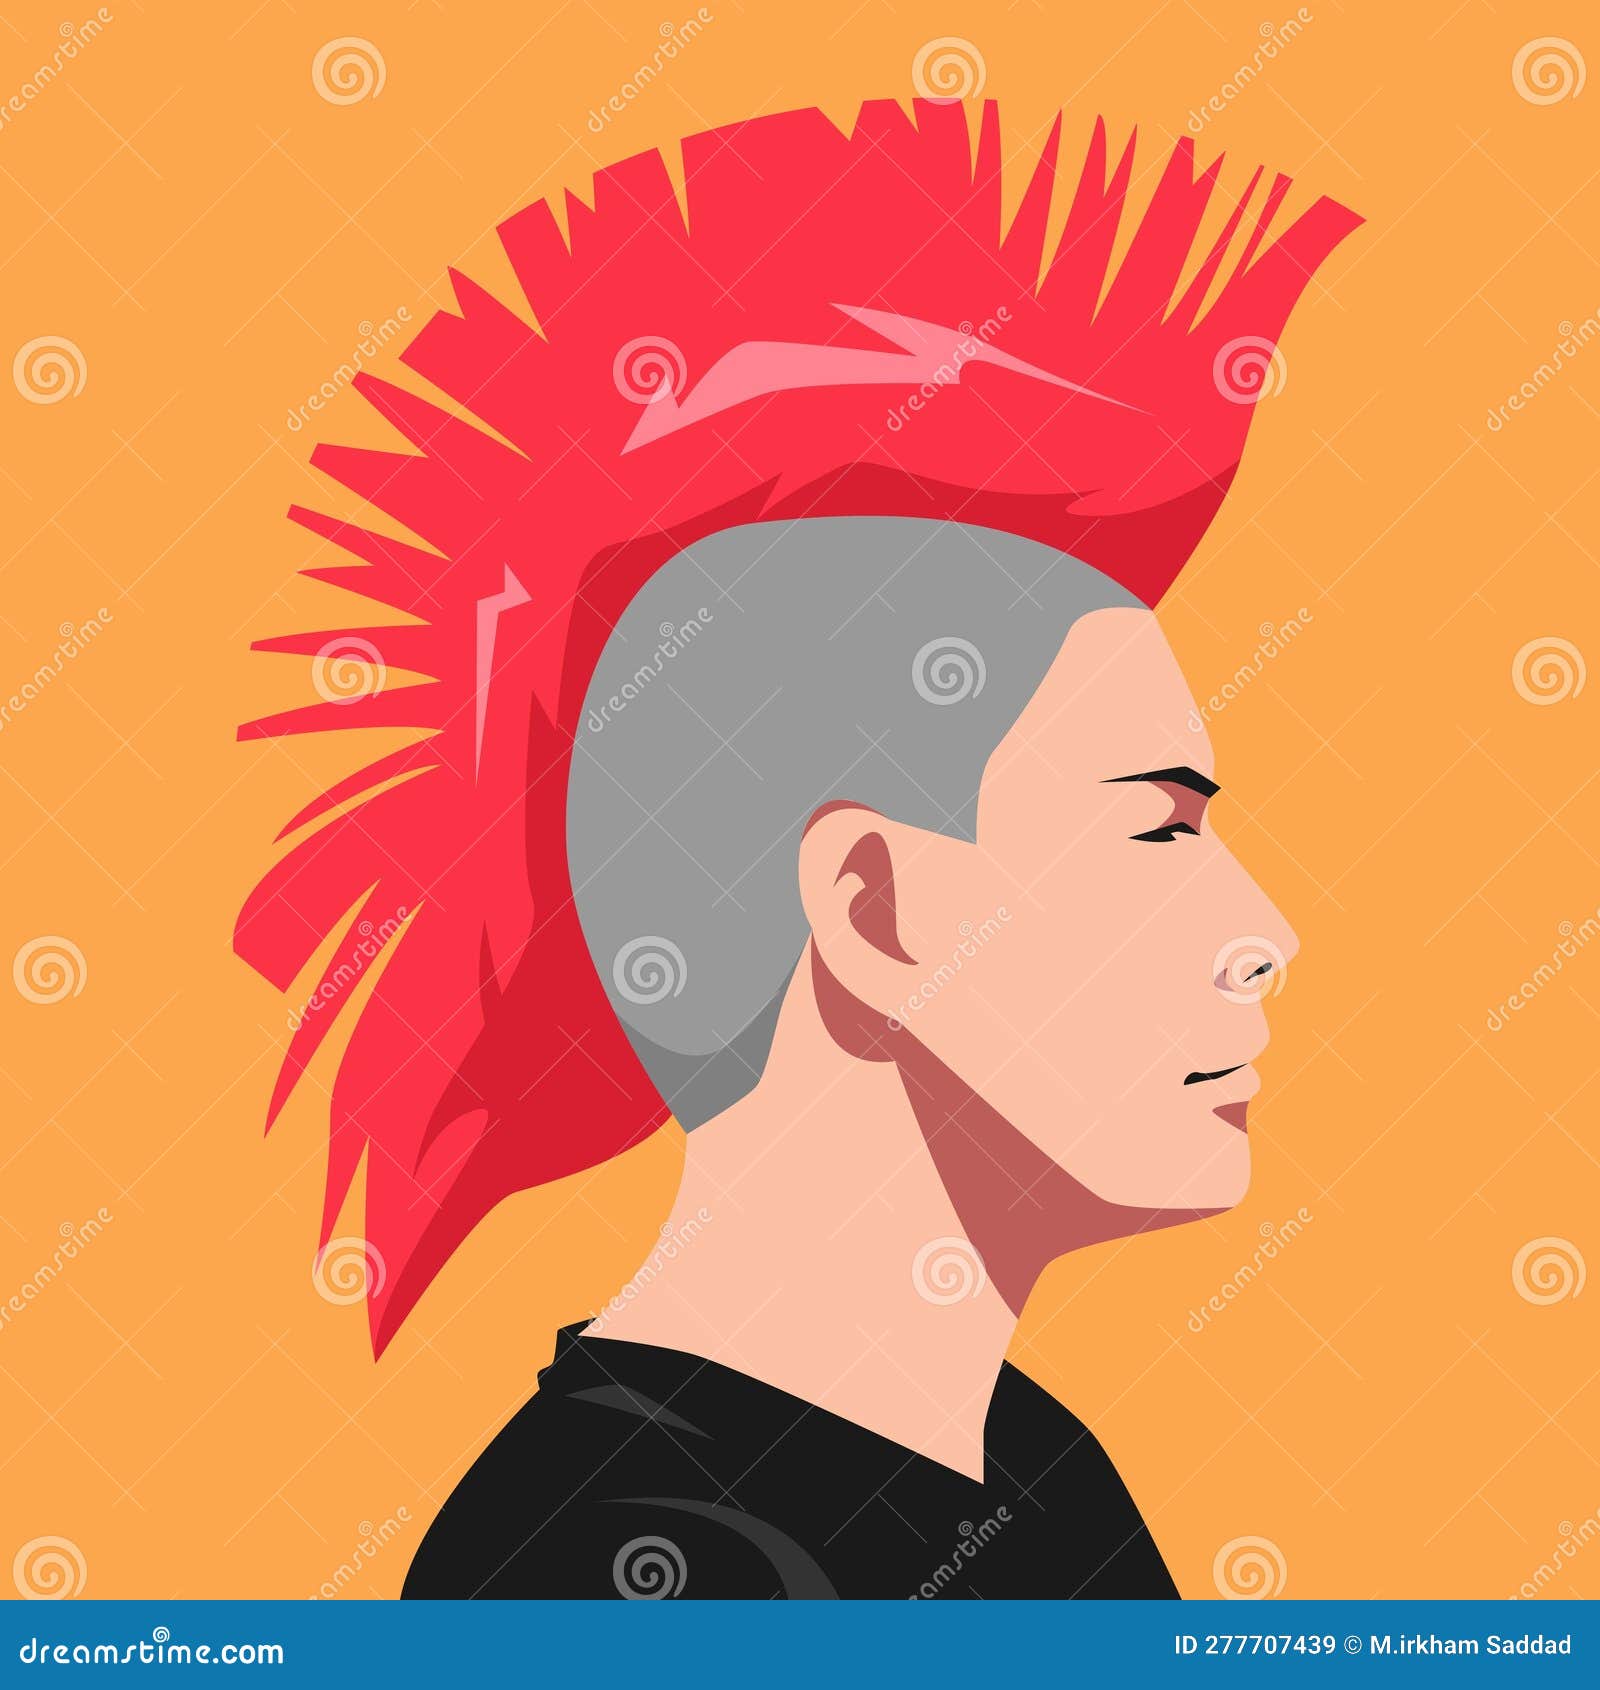 45 Cool Punk Hairstyles for Men: Quick Tips to Get Them